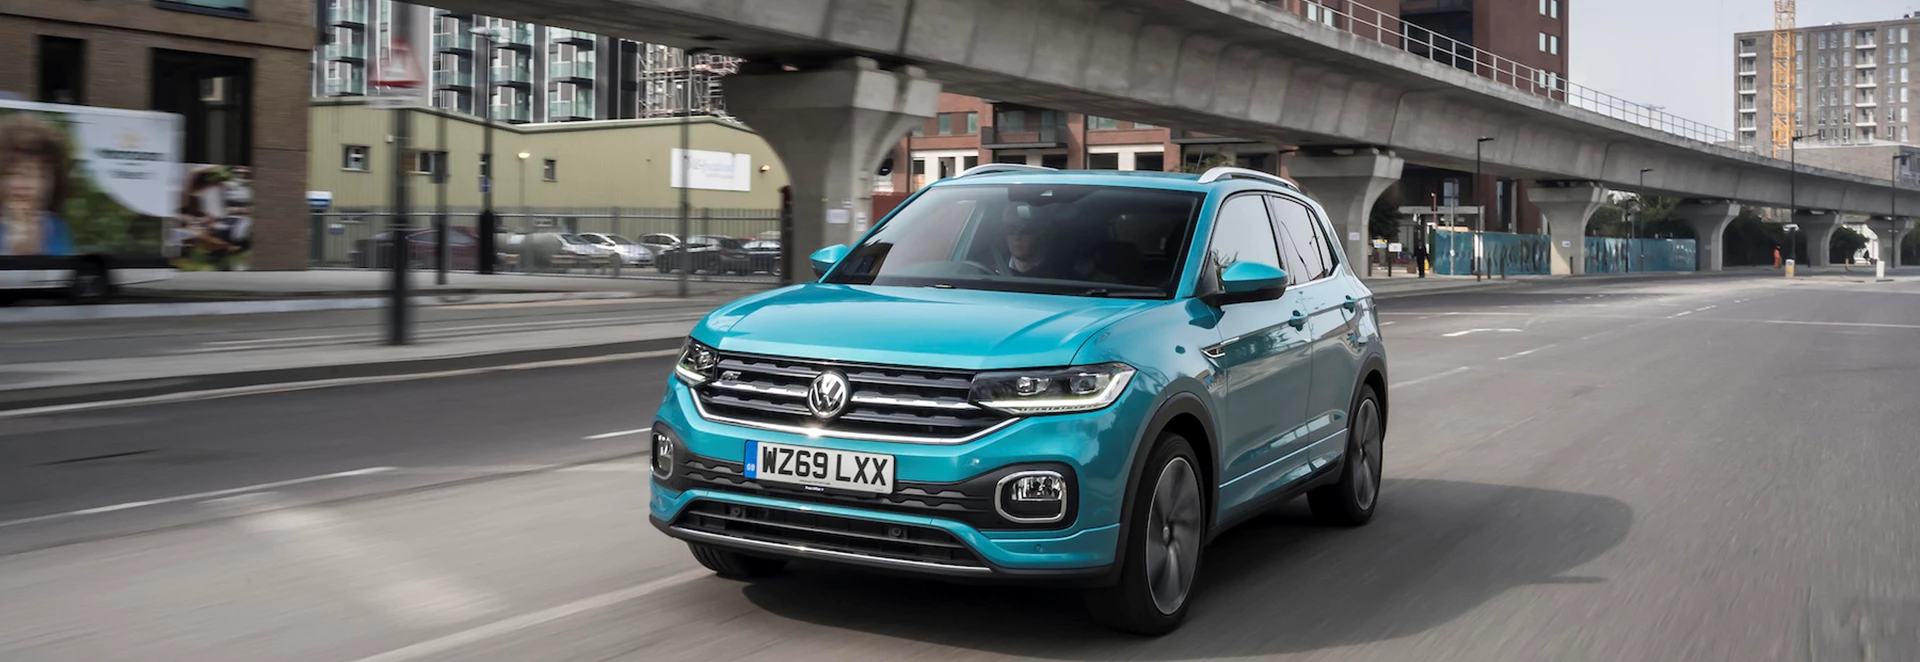 Volkswagen adds more powerful petrol engine to T-Cross crossover line-up